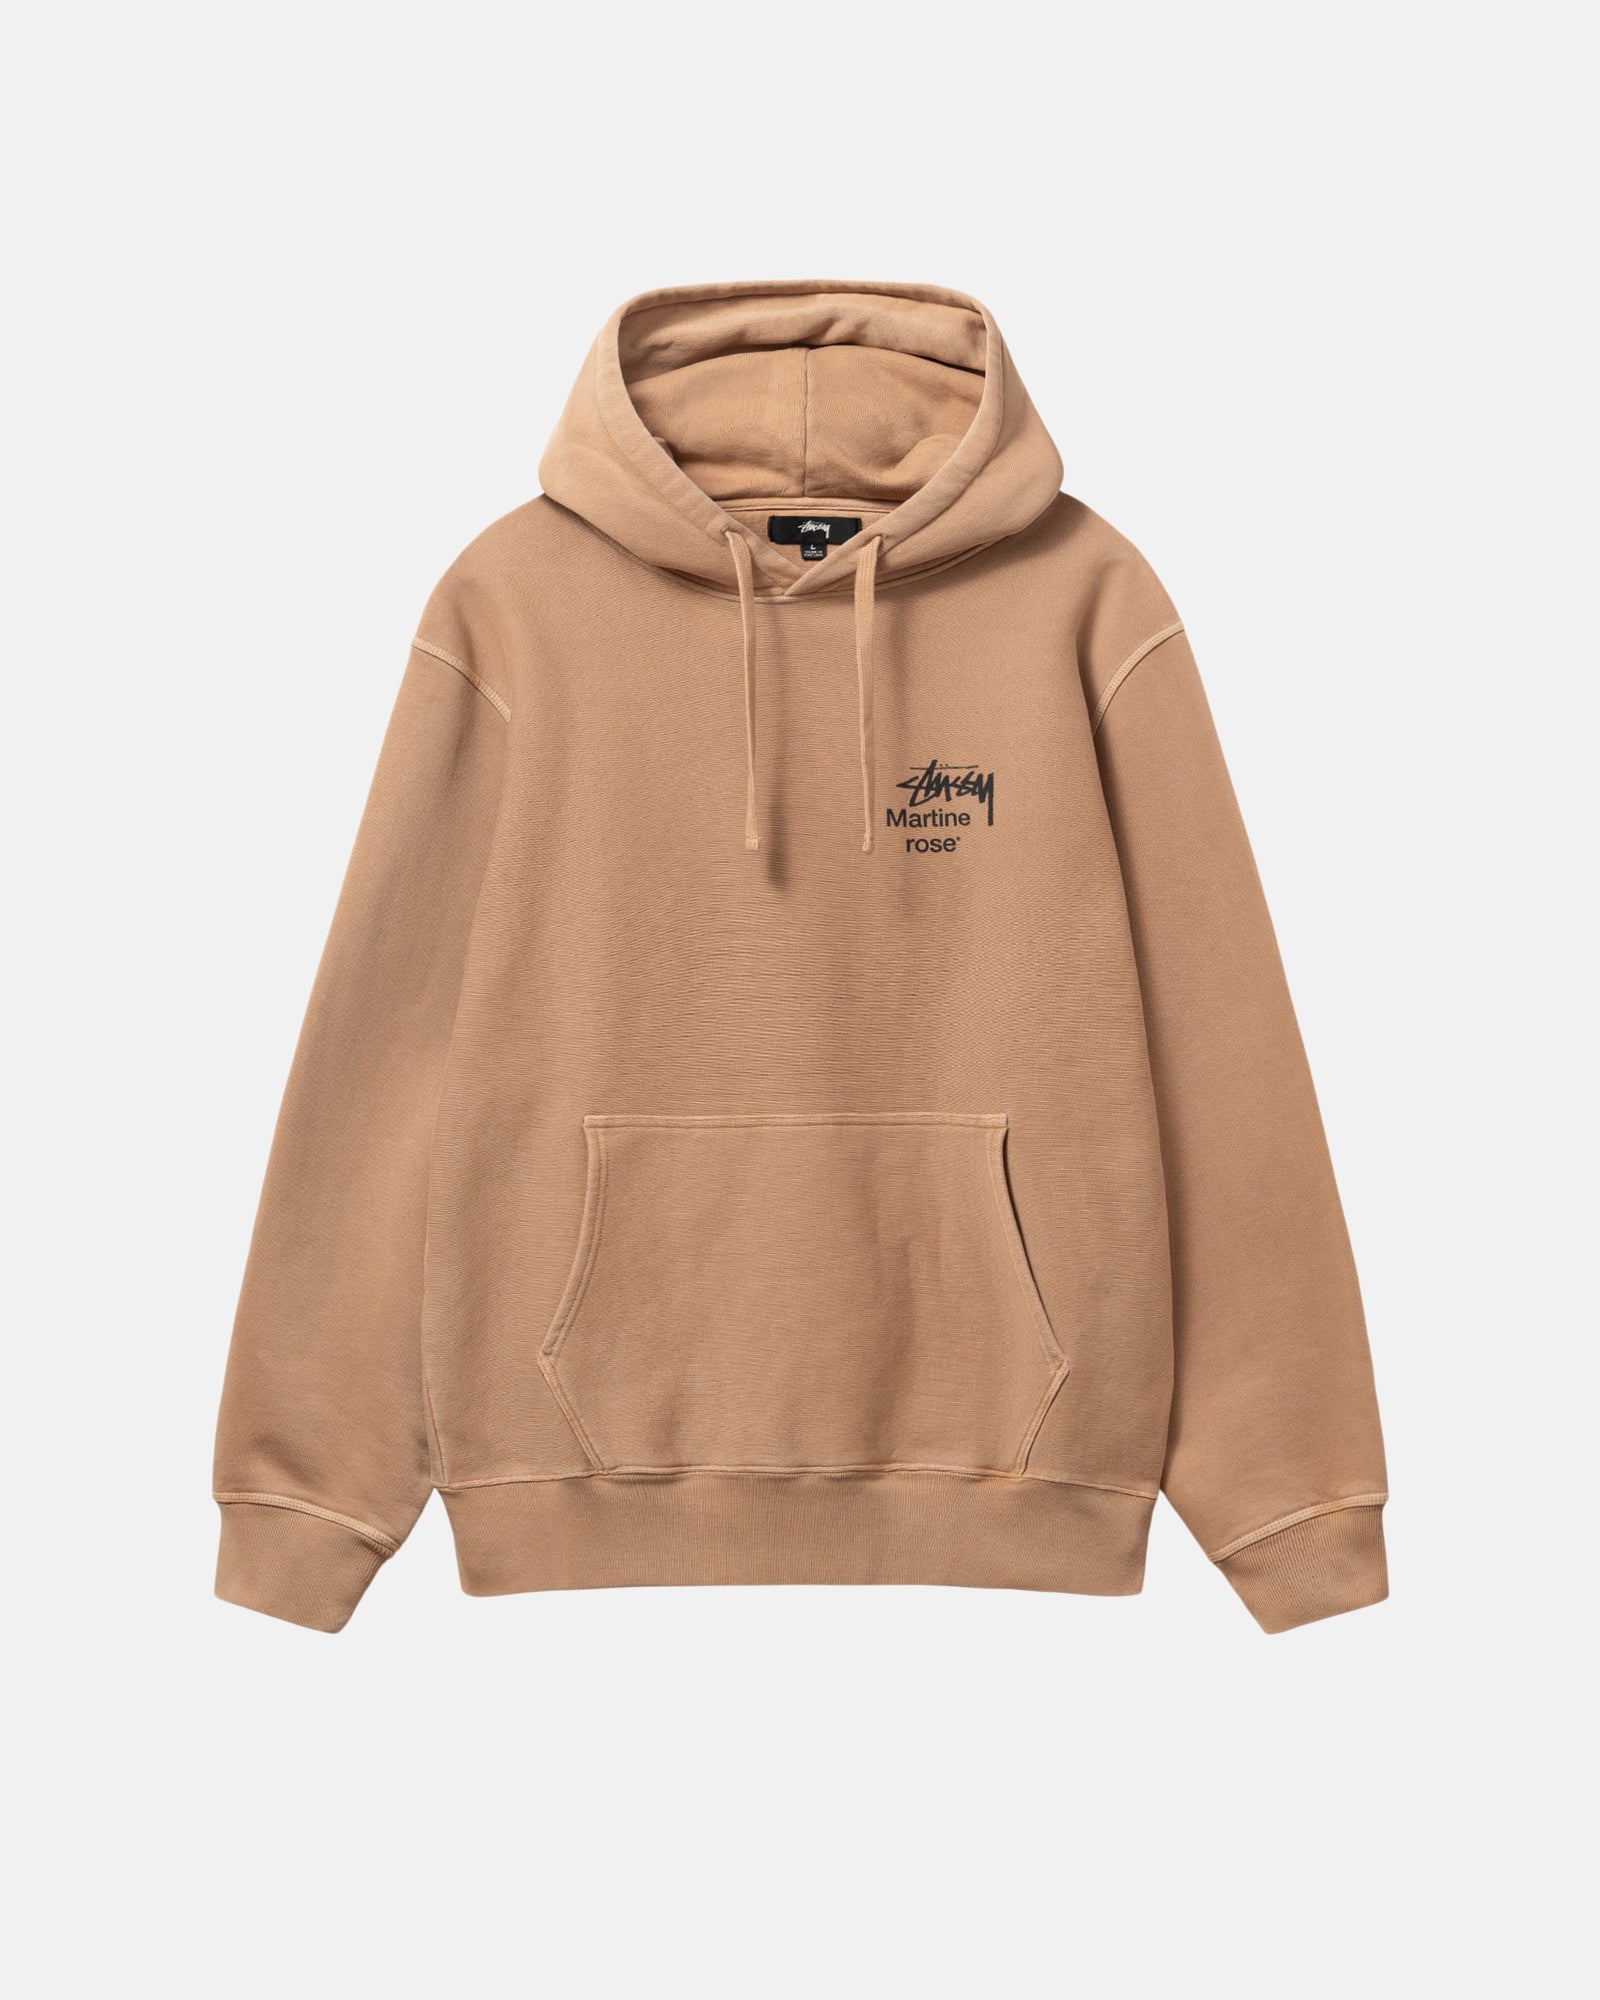 STÜSSY & MARTINE ROSE COLLAGE PIGMENT DYED HOODIE